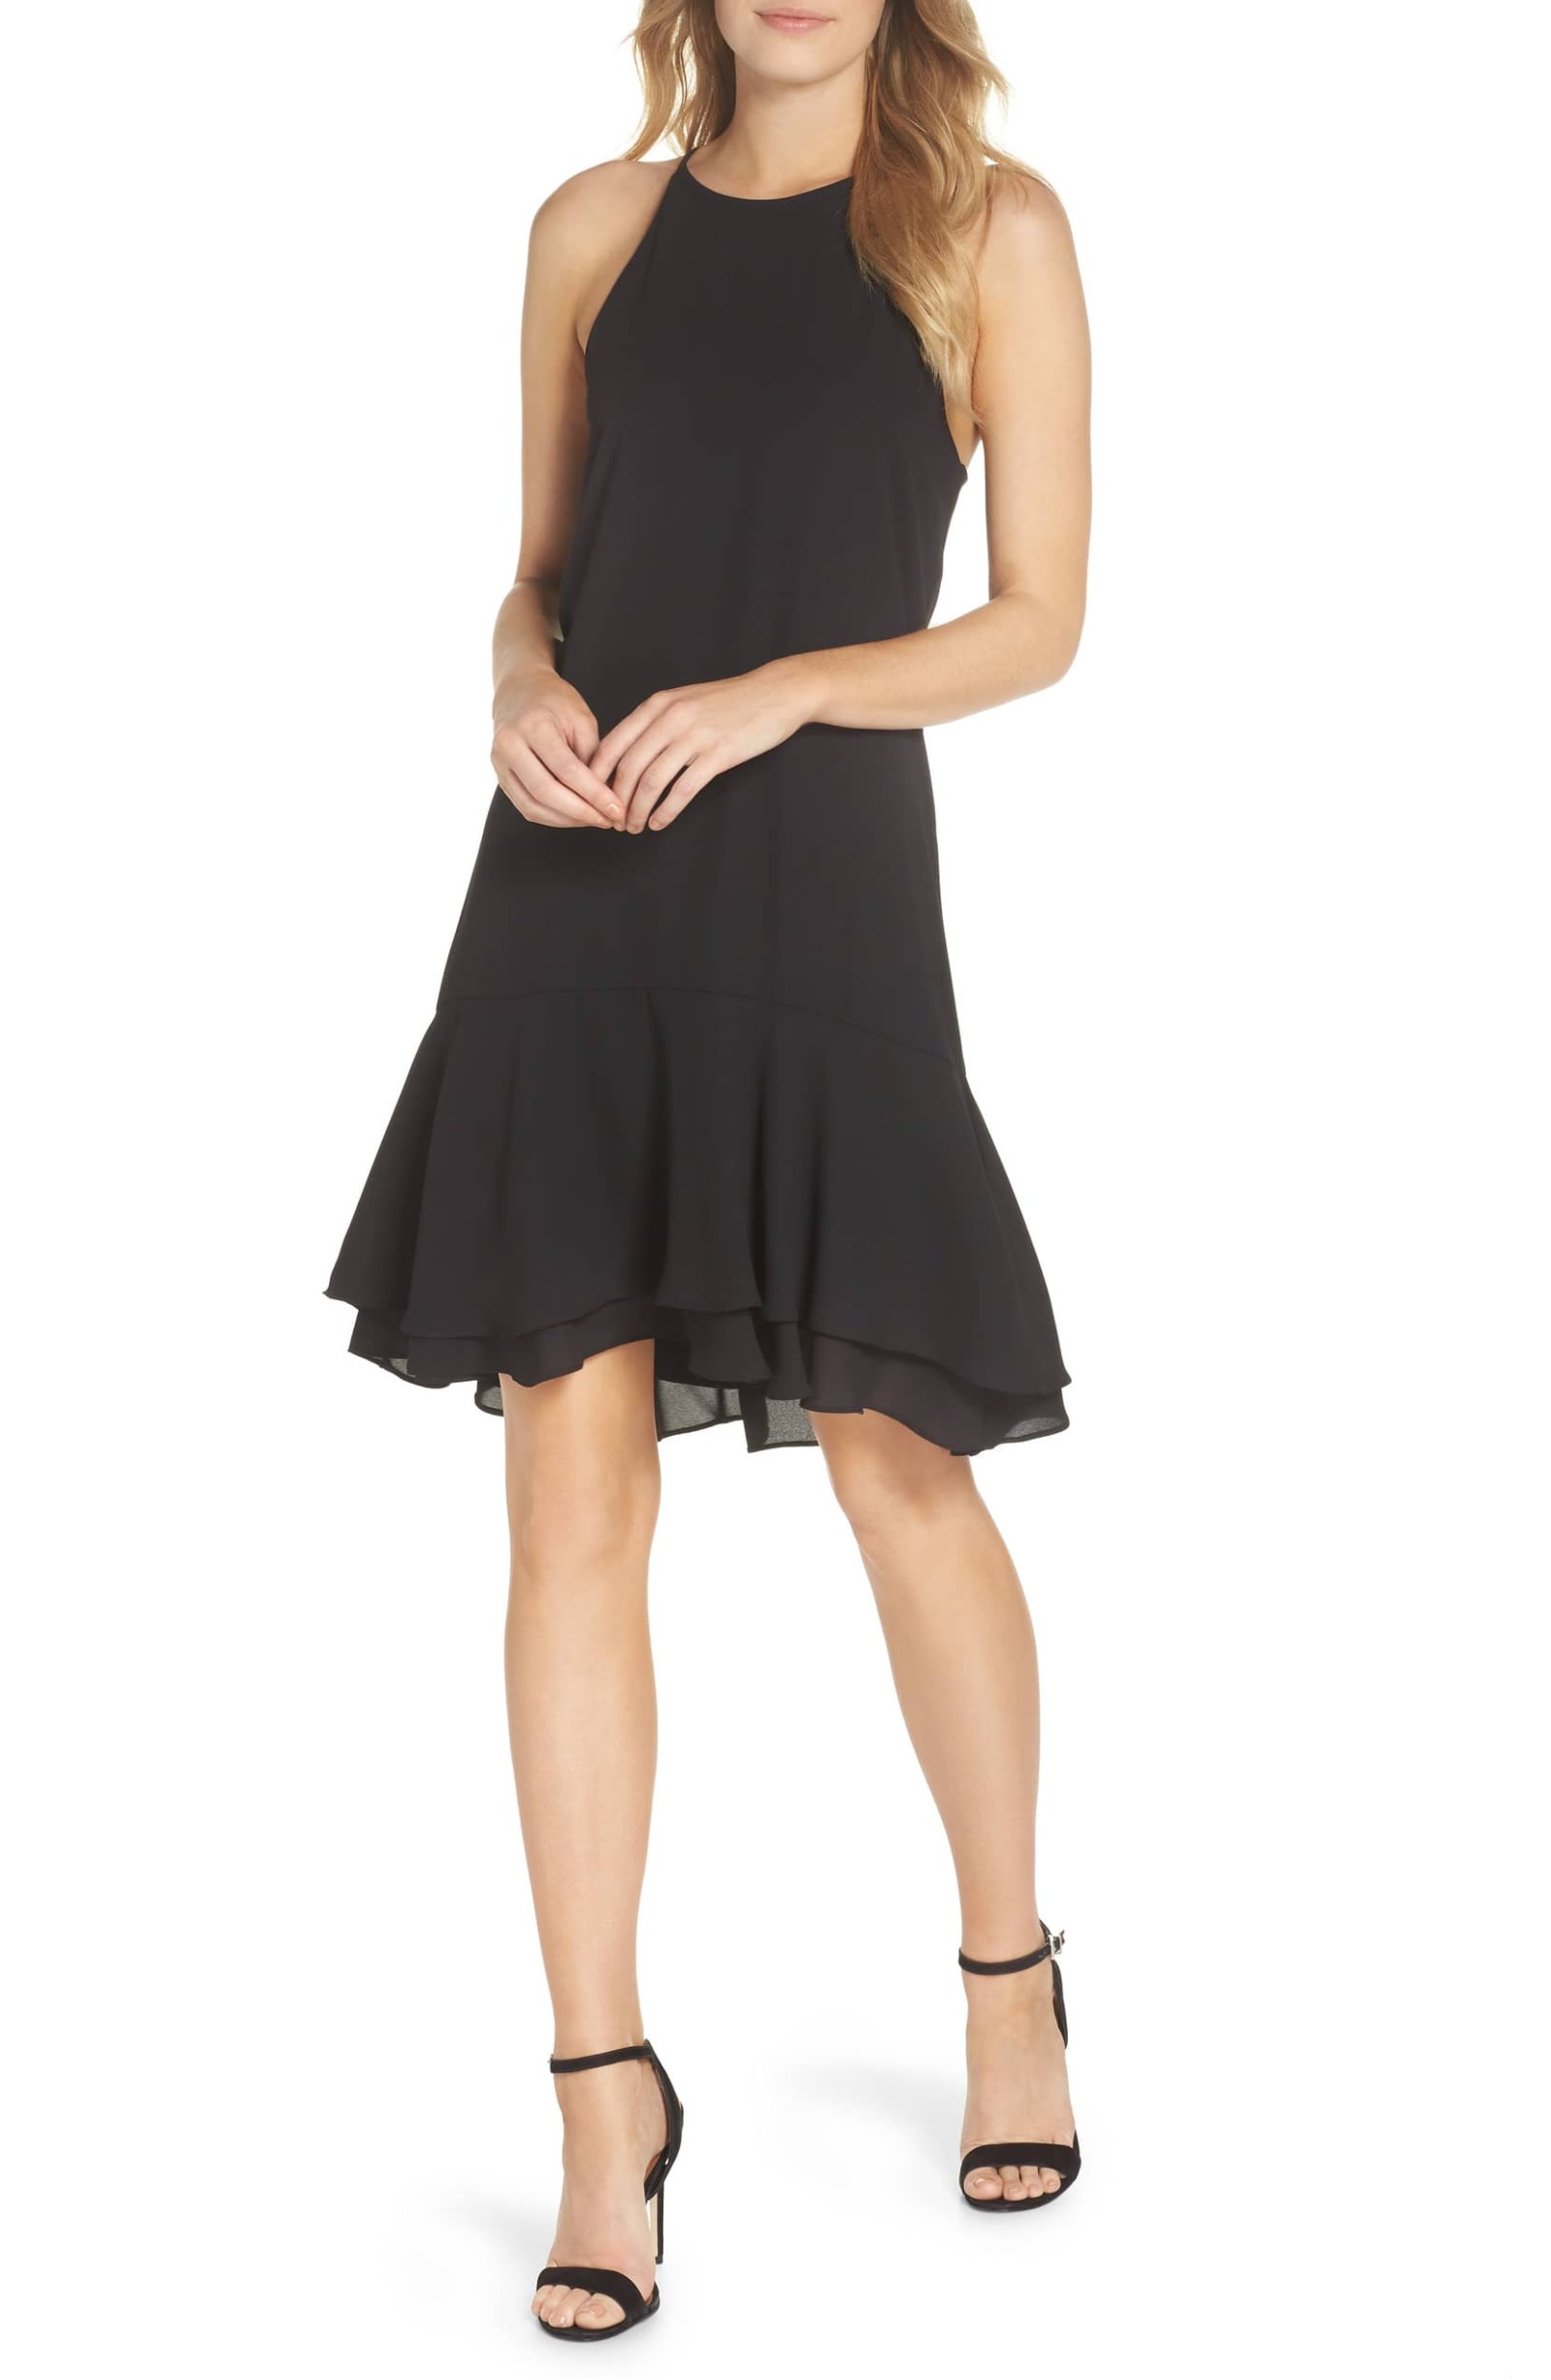 Shop This Little Black Dress for a Simple Fashion Statement | Us Weekly